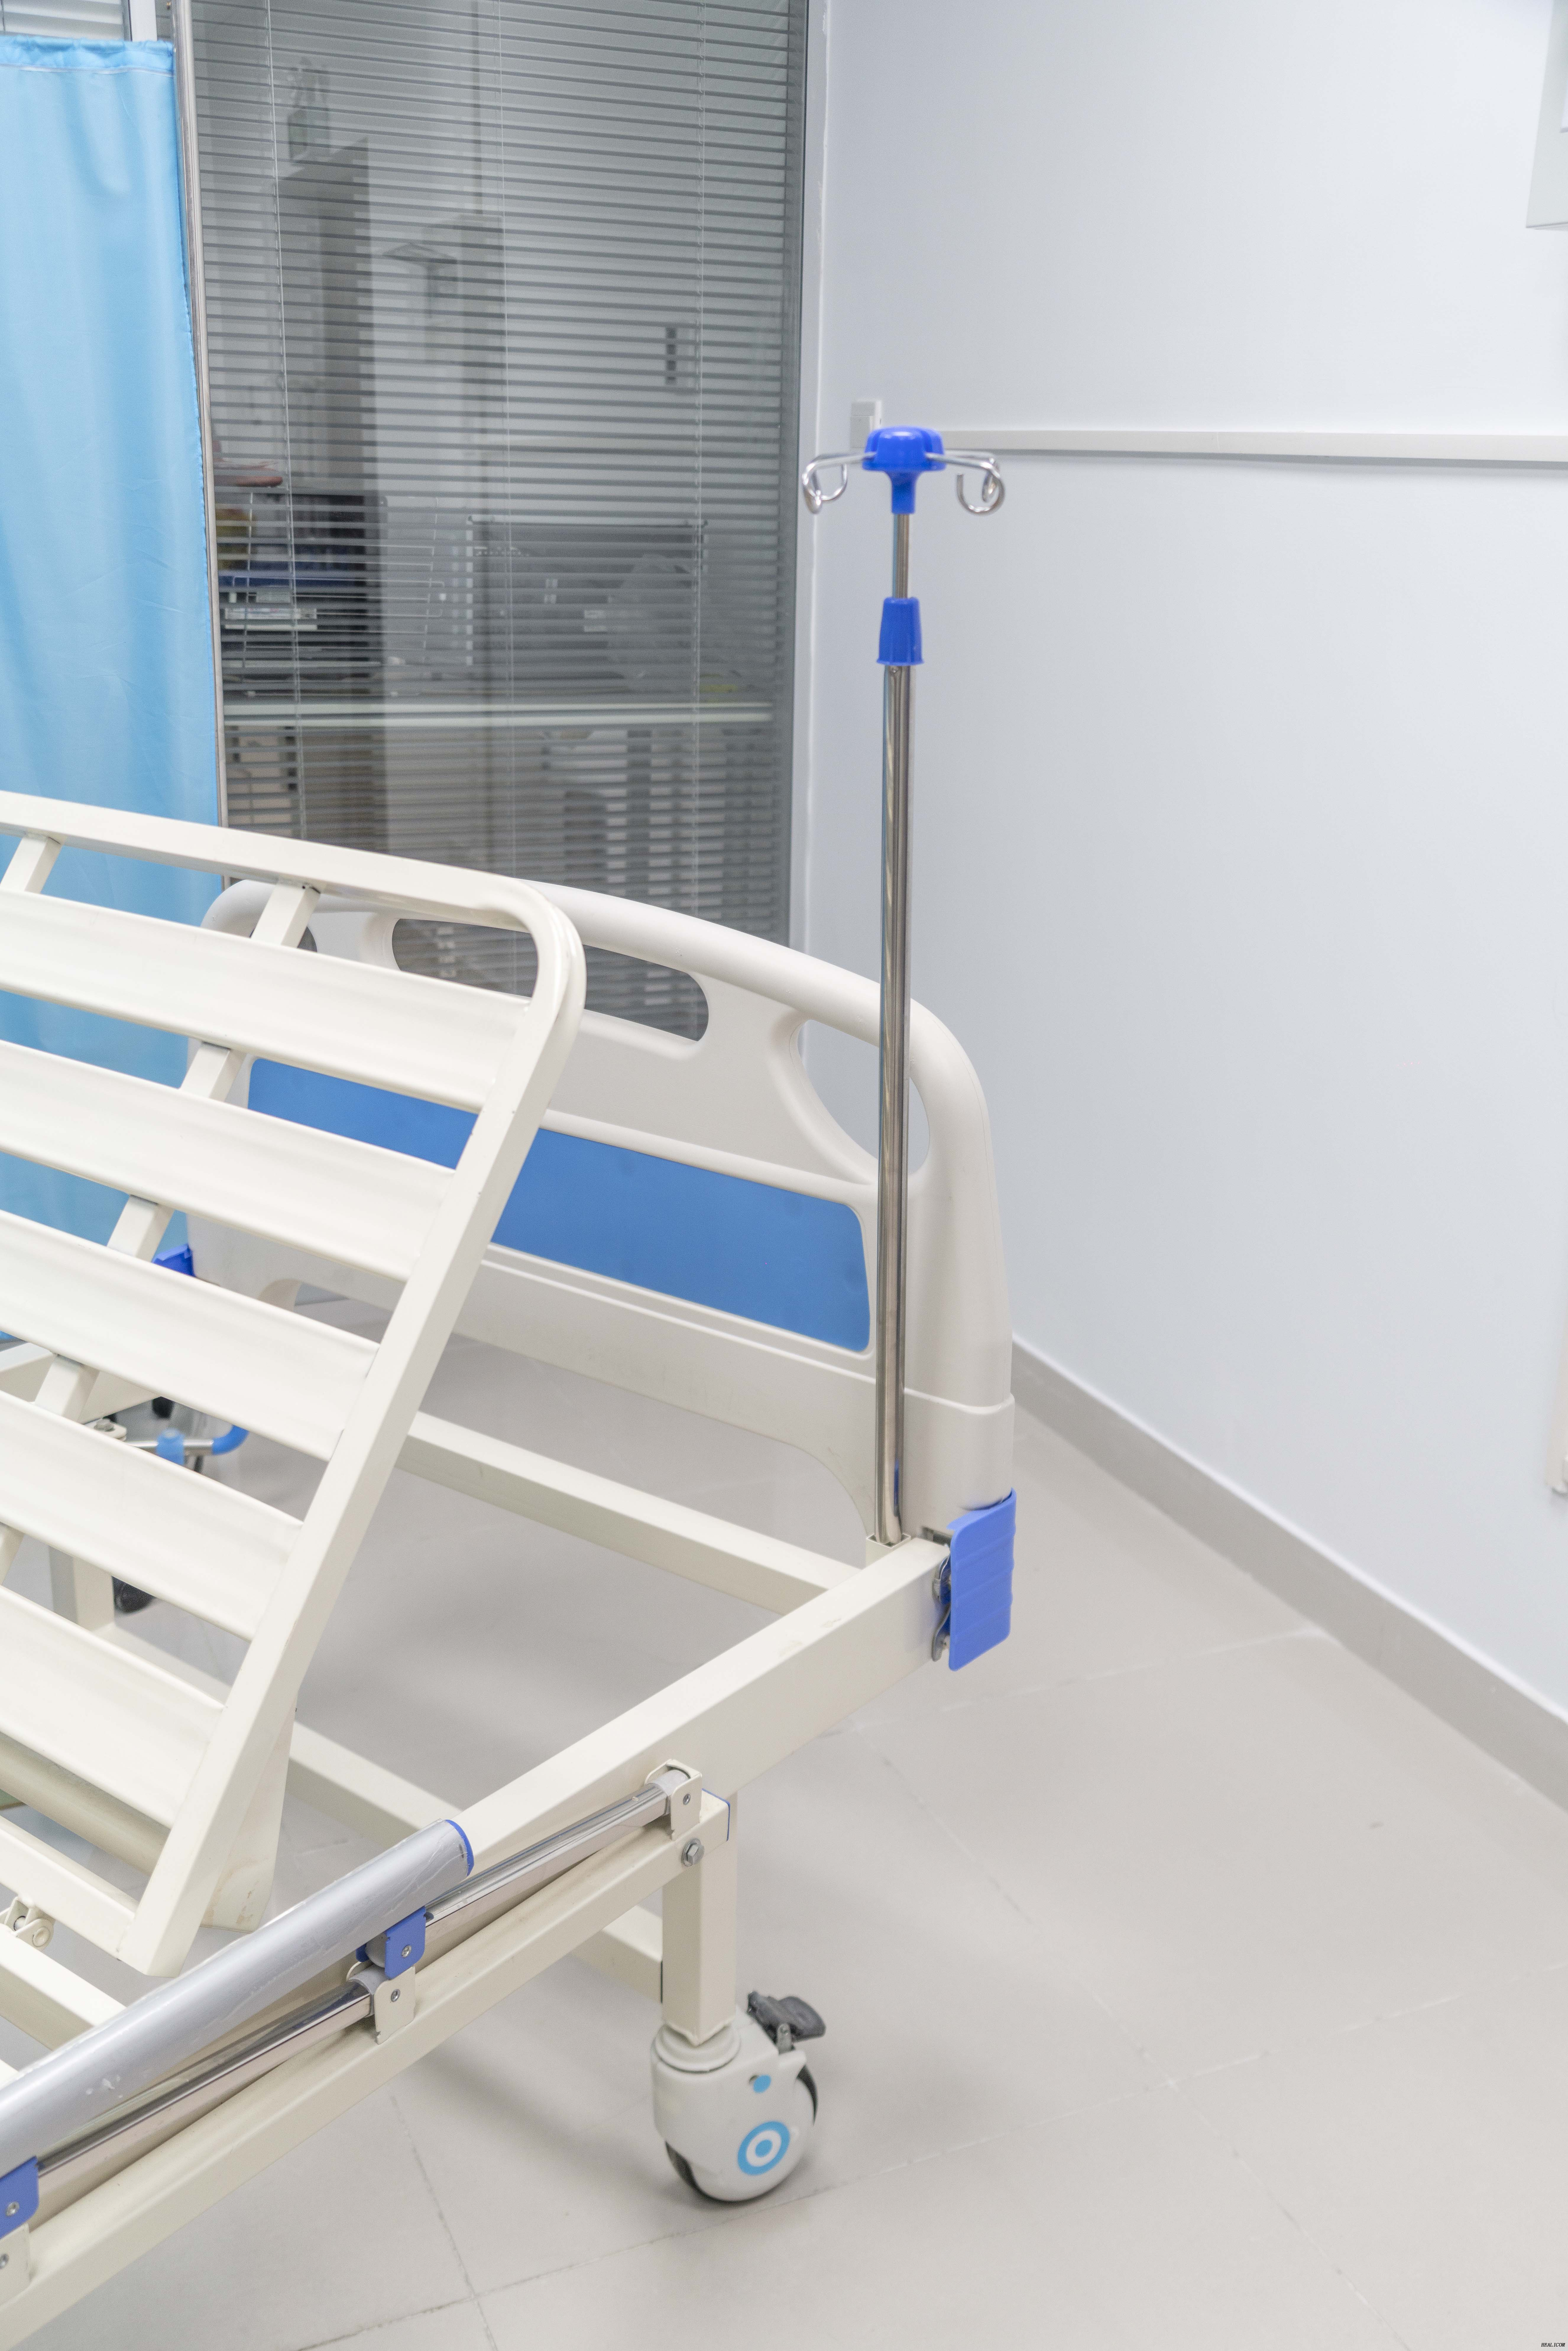 Best Price Medical Hospital Equipment DP-M002 ABS Adjustable Two-cranK Manual Patient Bed With Guardrail